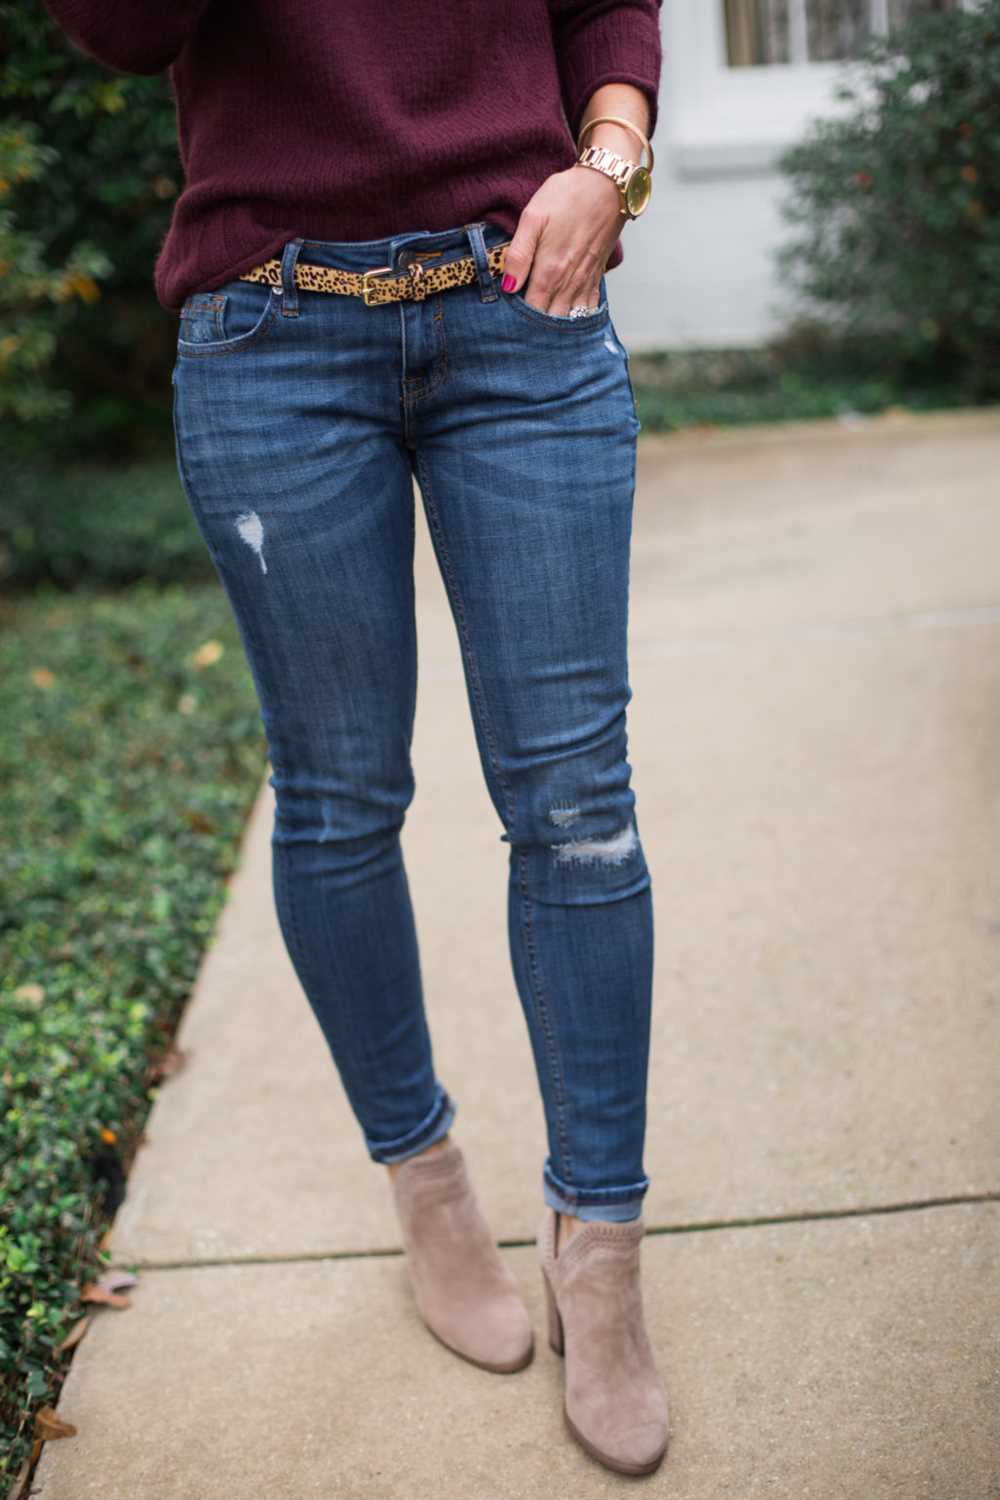 How to wear skinny jeans and booties